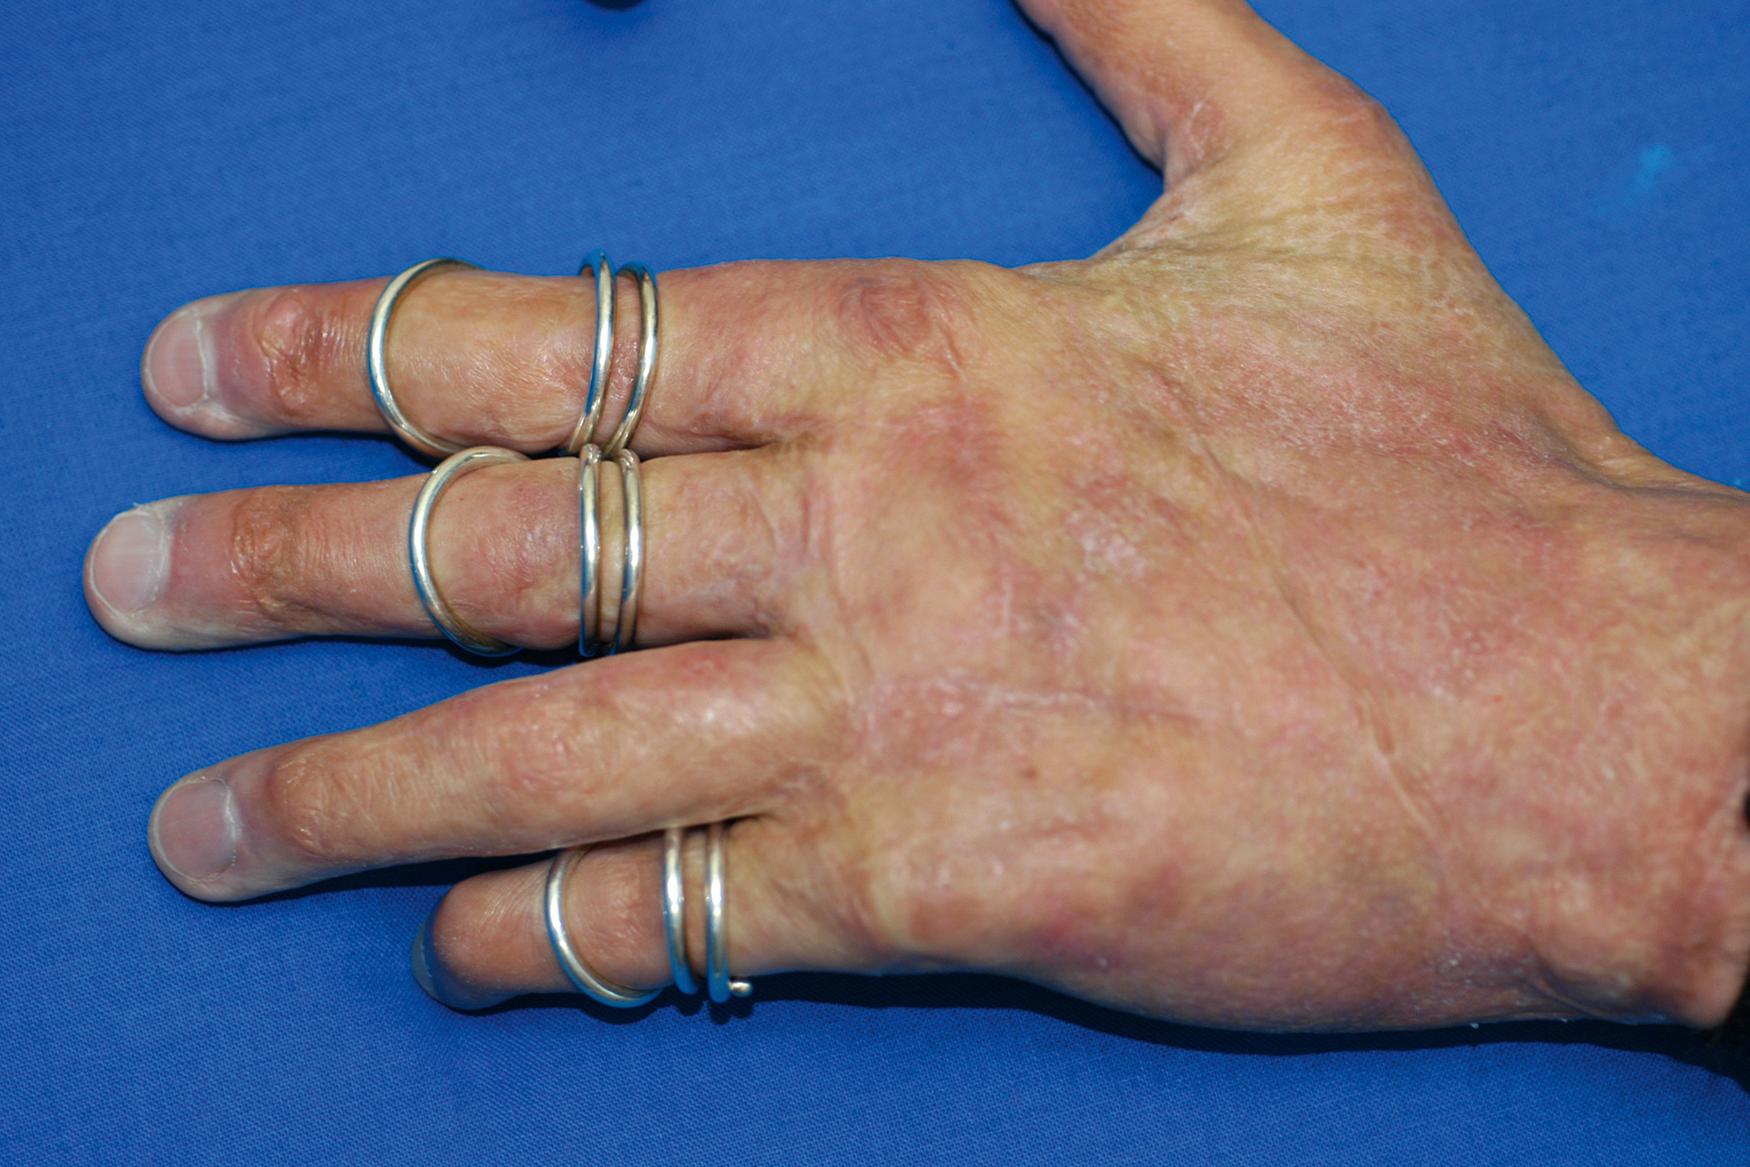 Fig. 44.9, Hand of a patient who suffered burns of the hands and was treated with excision and primary split-thickness sheet grafting. Note quality of dorsal hand skin after placement of sheet graft.